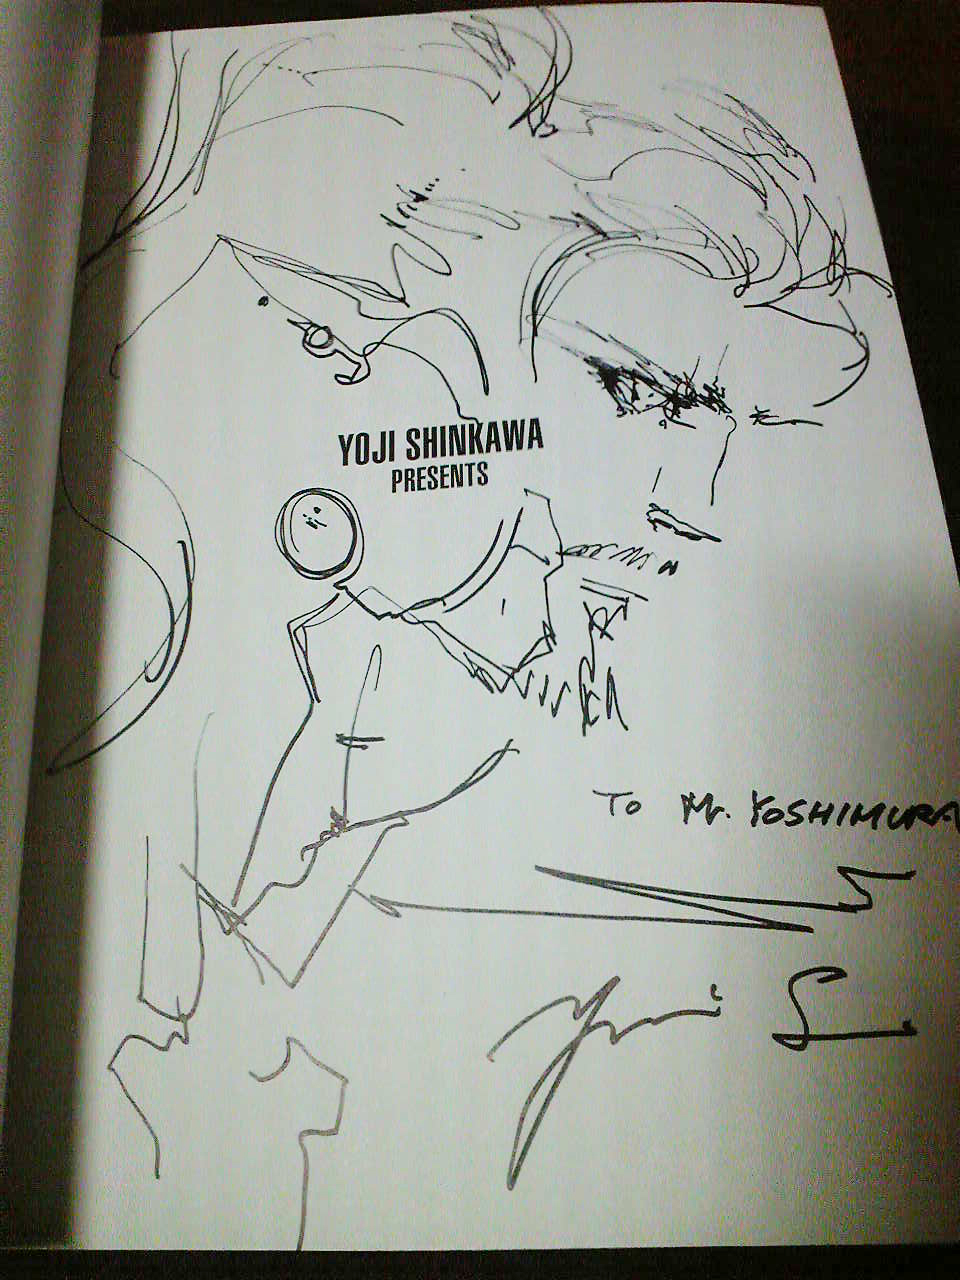 A picture of Sam that Shinkawa-san drew for me in an artbook during our meeting!